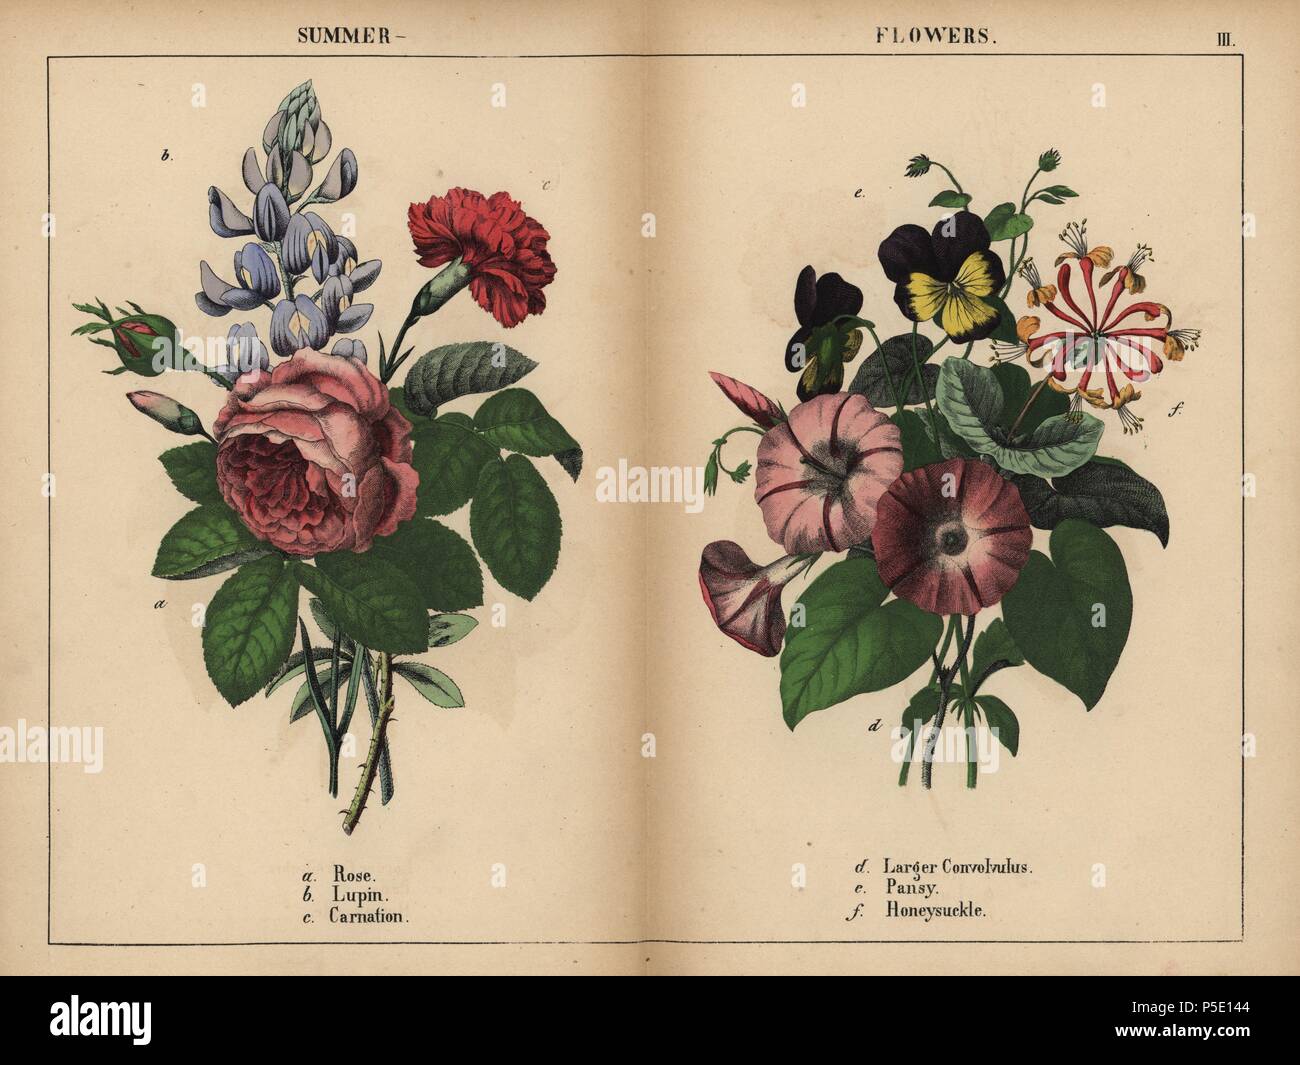 Pink cabbage rose, blue lupin, scarlet carnation, purple larger convolvulus, purple and yellow pansy, and pink and orange honeysuckle.. . Chromolithograph from 'The Instructive Picturebook, or Lessons from the Vegetable World,' [Charlotte Mary Yonge], Edinburgh, 1858. Stock Photo